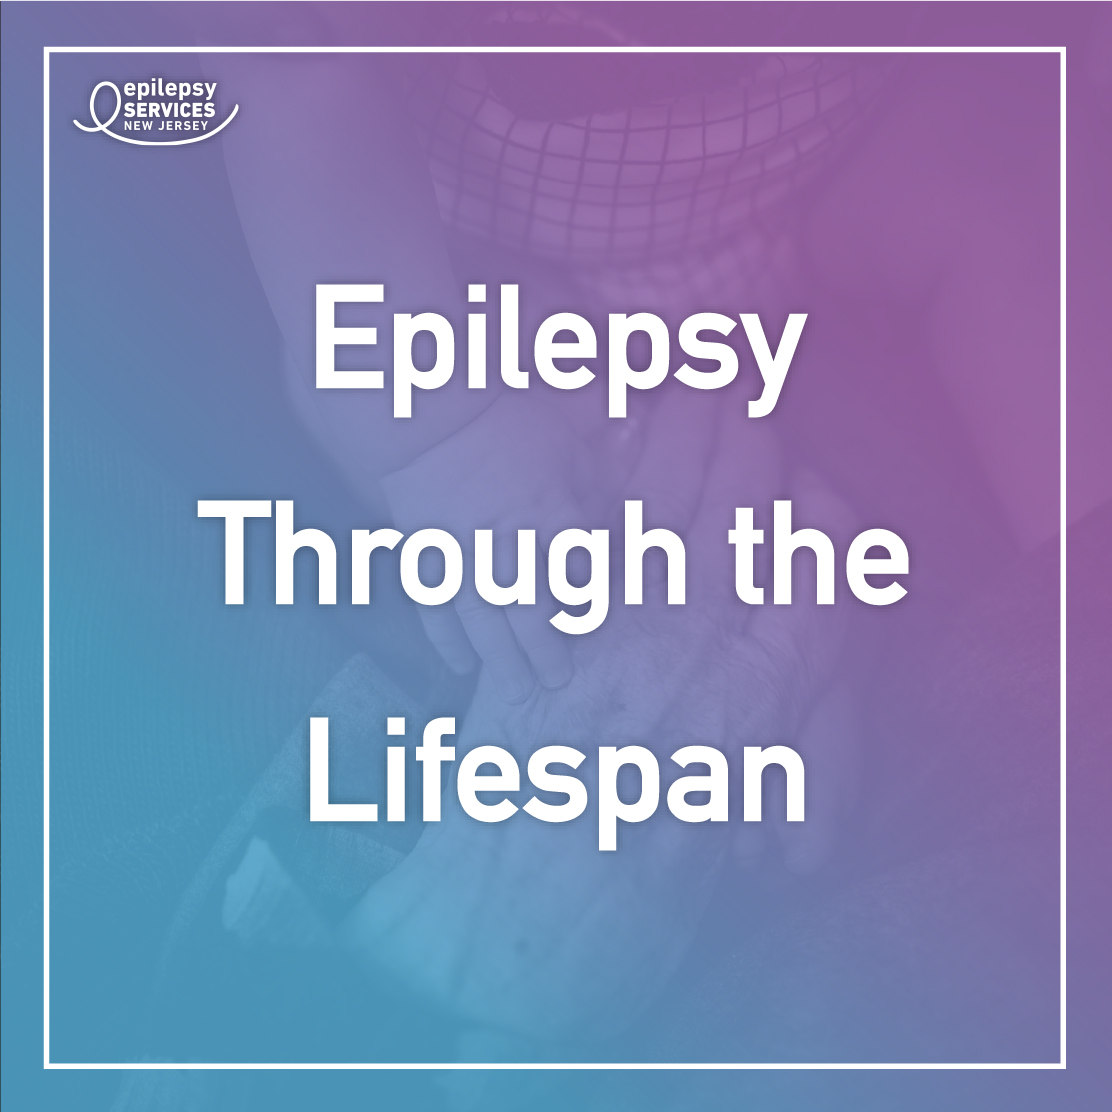 Epilepsy affects people of all ages. Learn what you need to know about epilepsy no matter what stage of life you are in. Click the link in our bio.

#1in26 #EpilepsyAwareness #NEAM2020 #EpilepsyResources